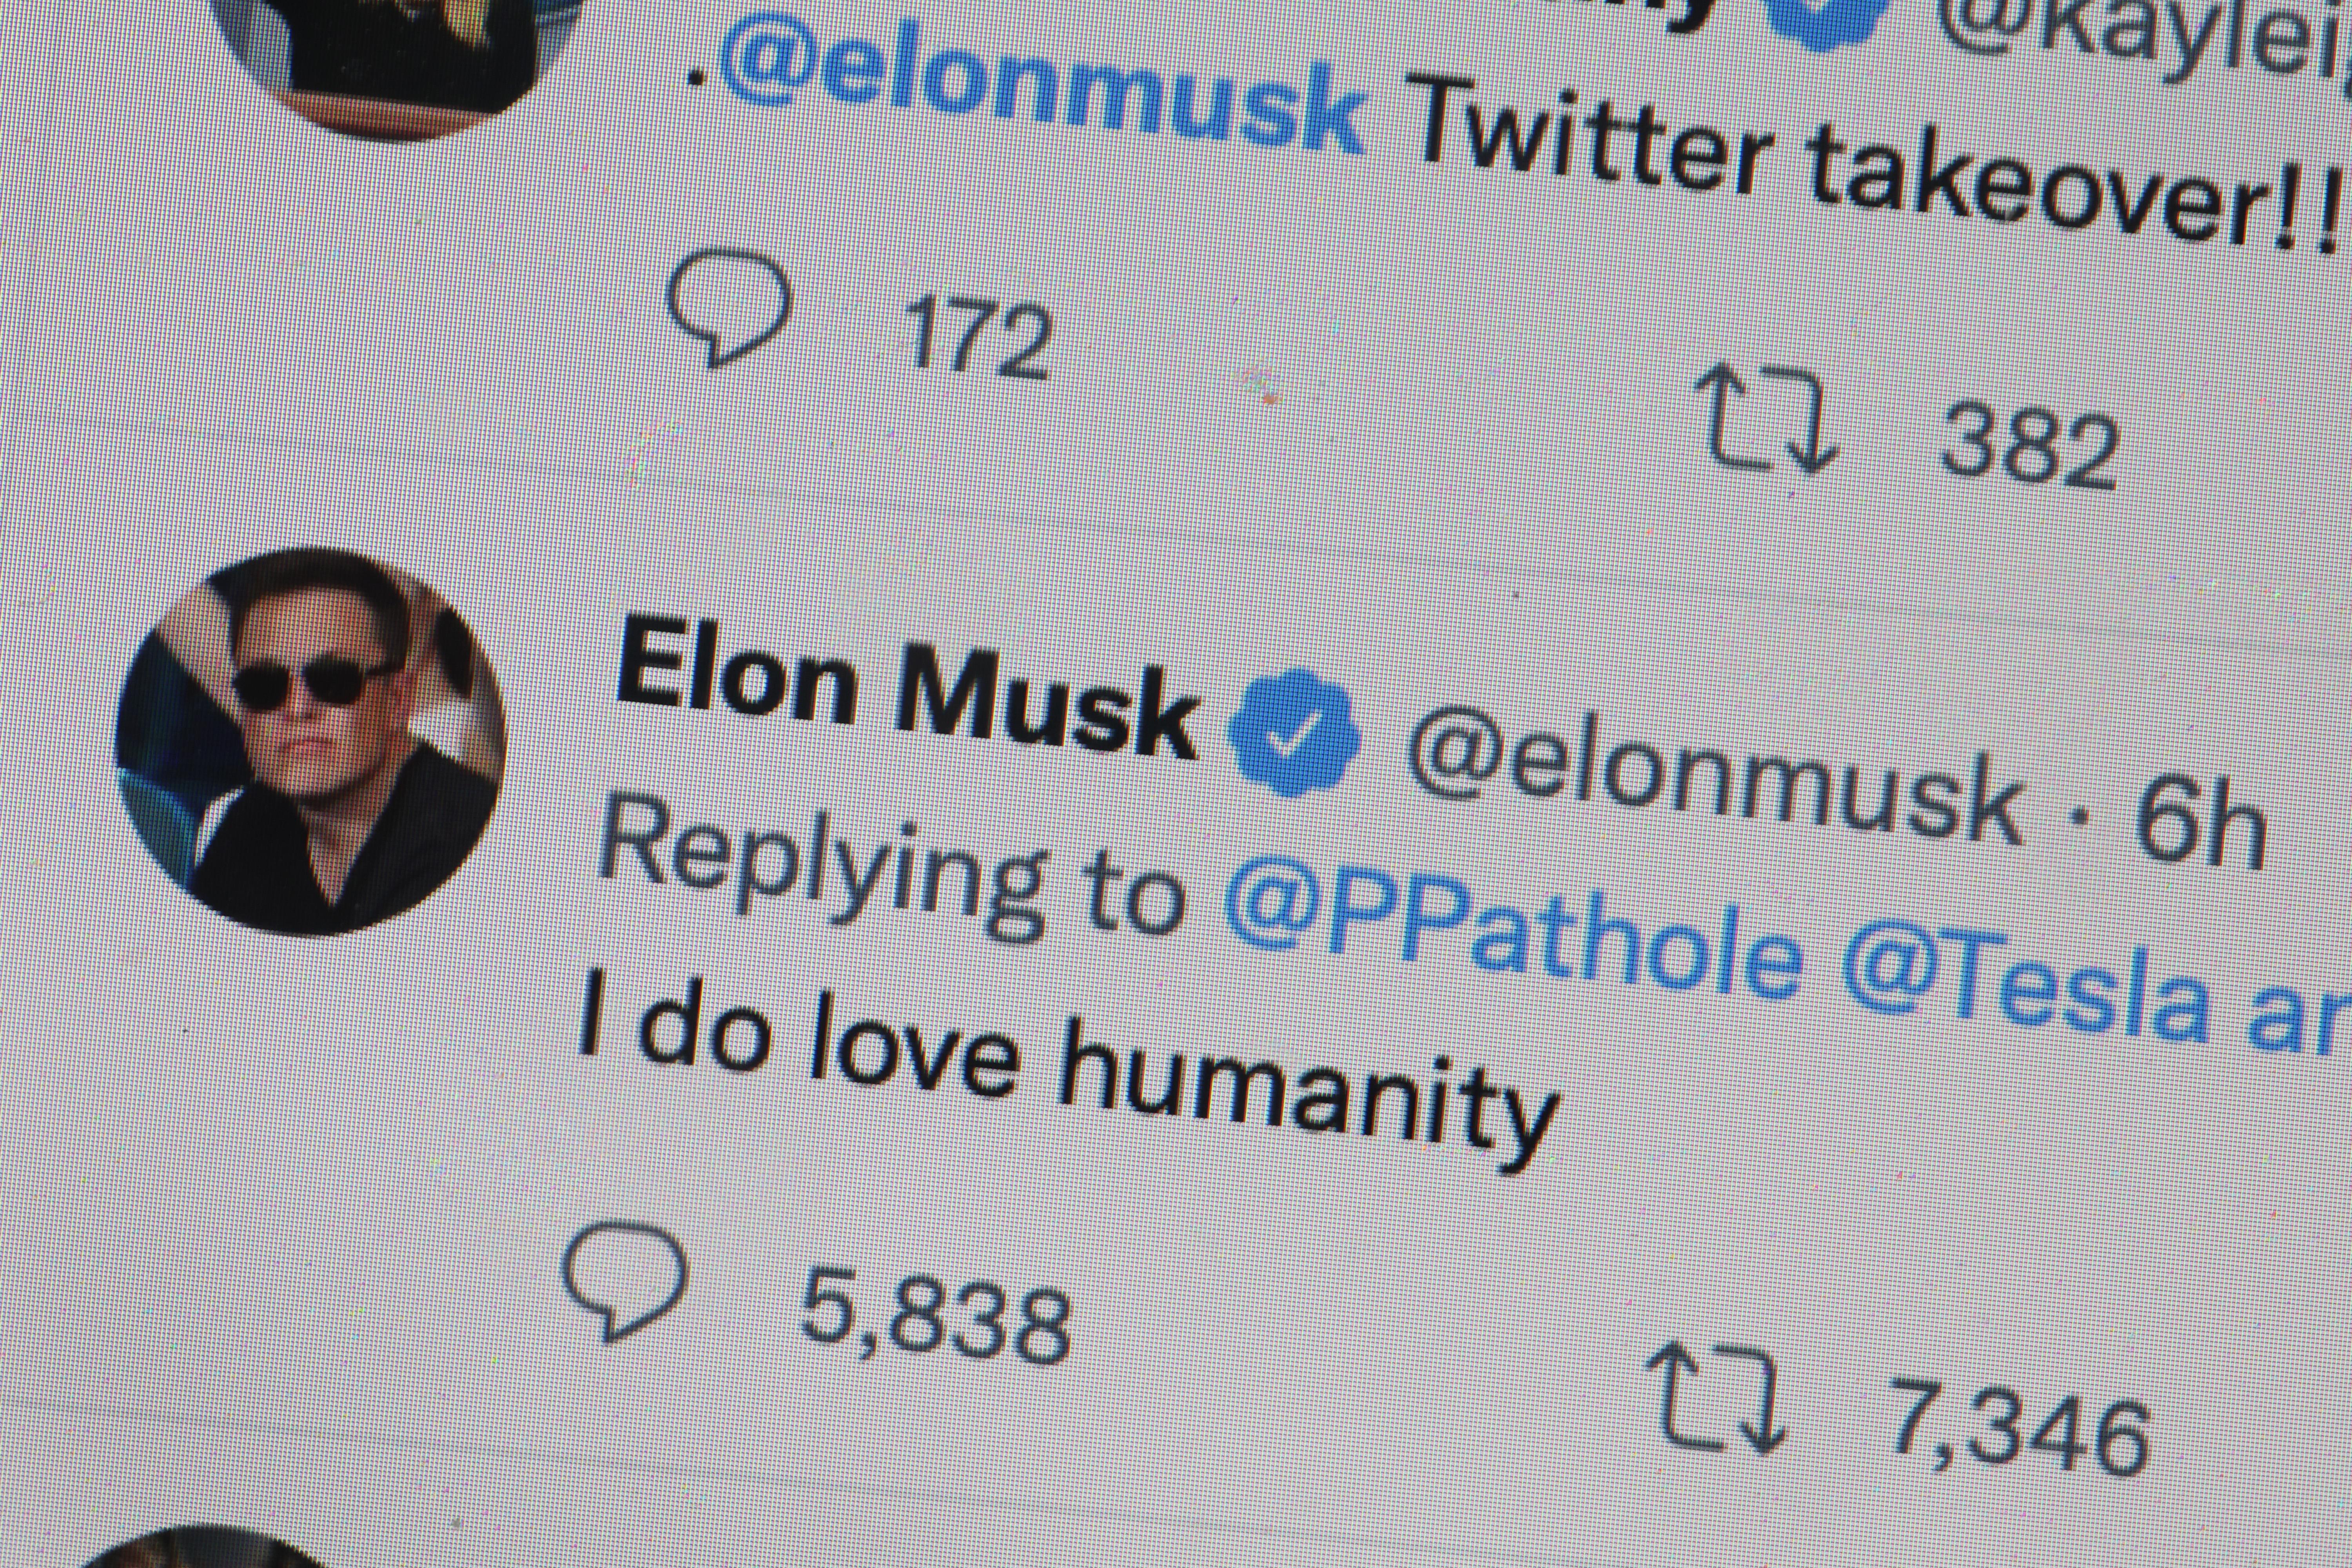 A screenshot of a tweet from Elon Musk that says "I do love humanity."